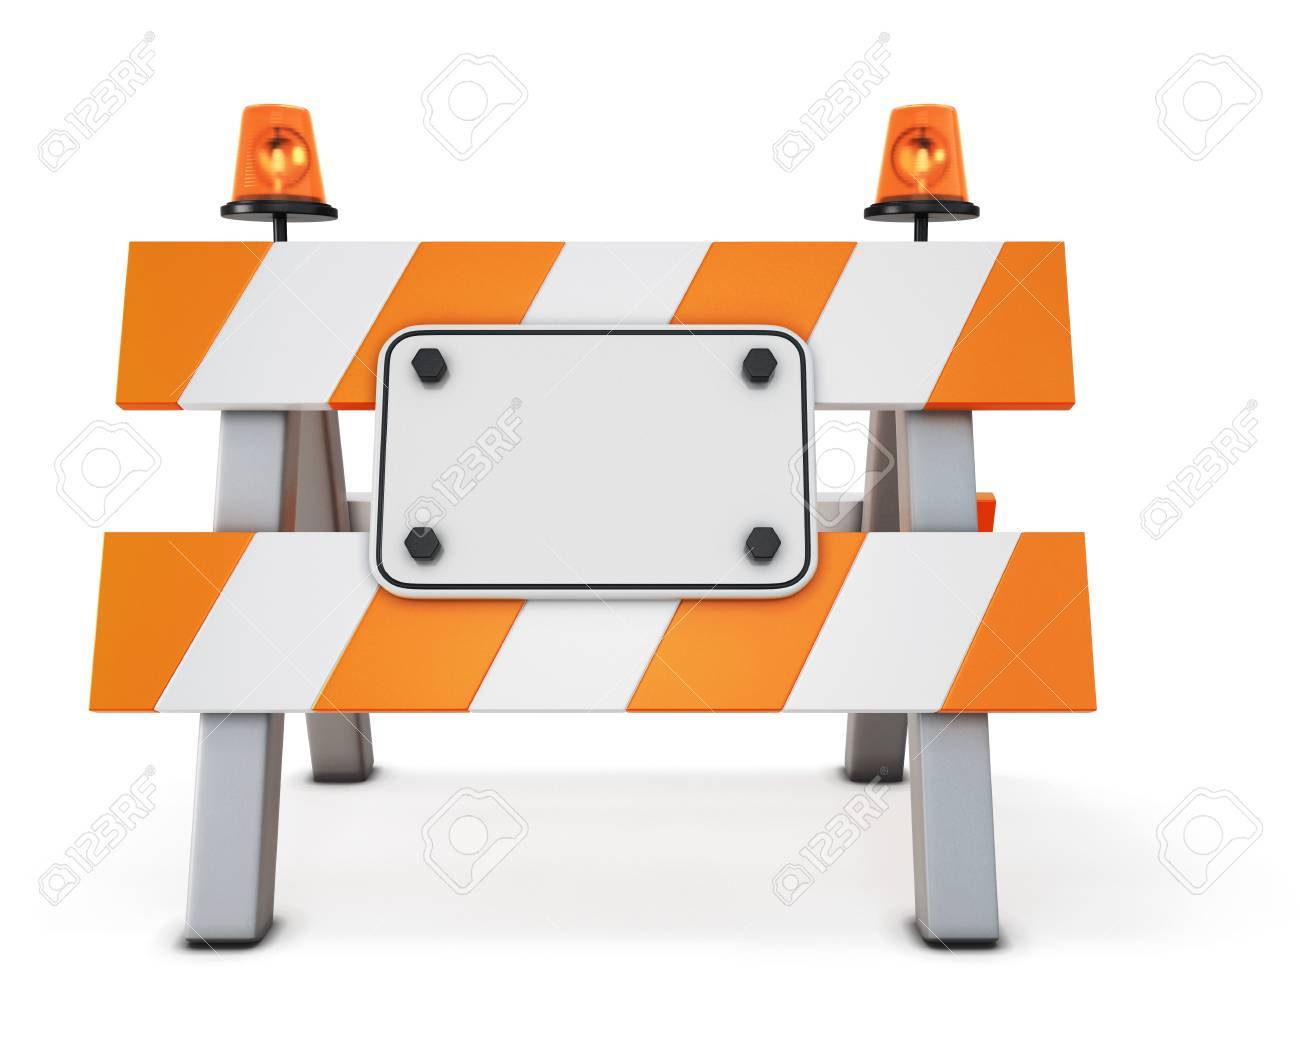 Road Closed Barricade Isolated On White Background 3d